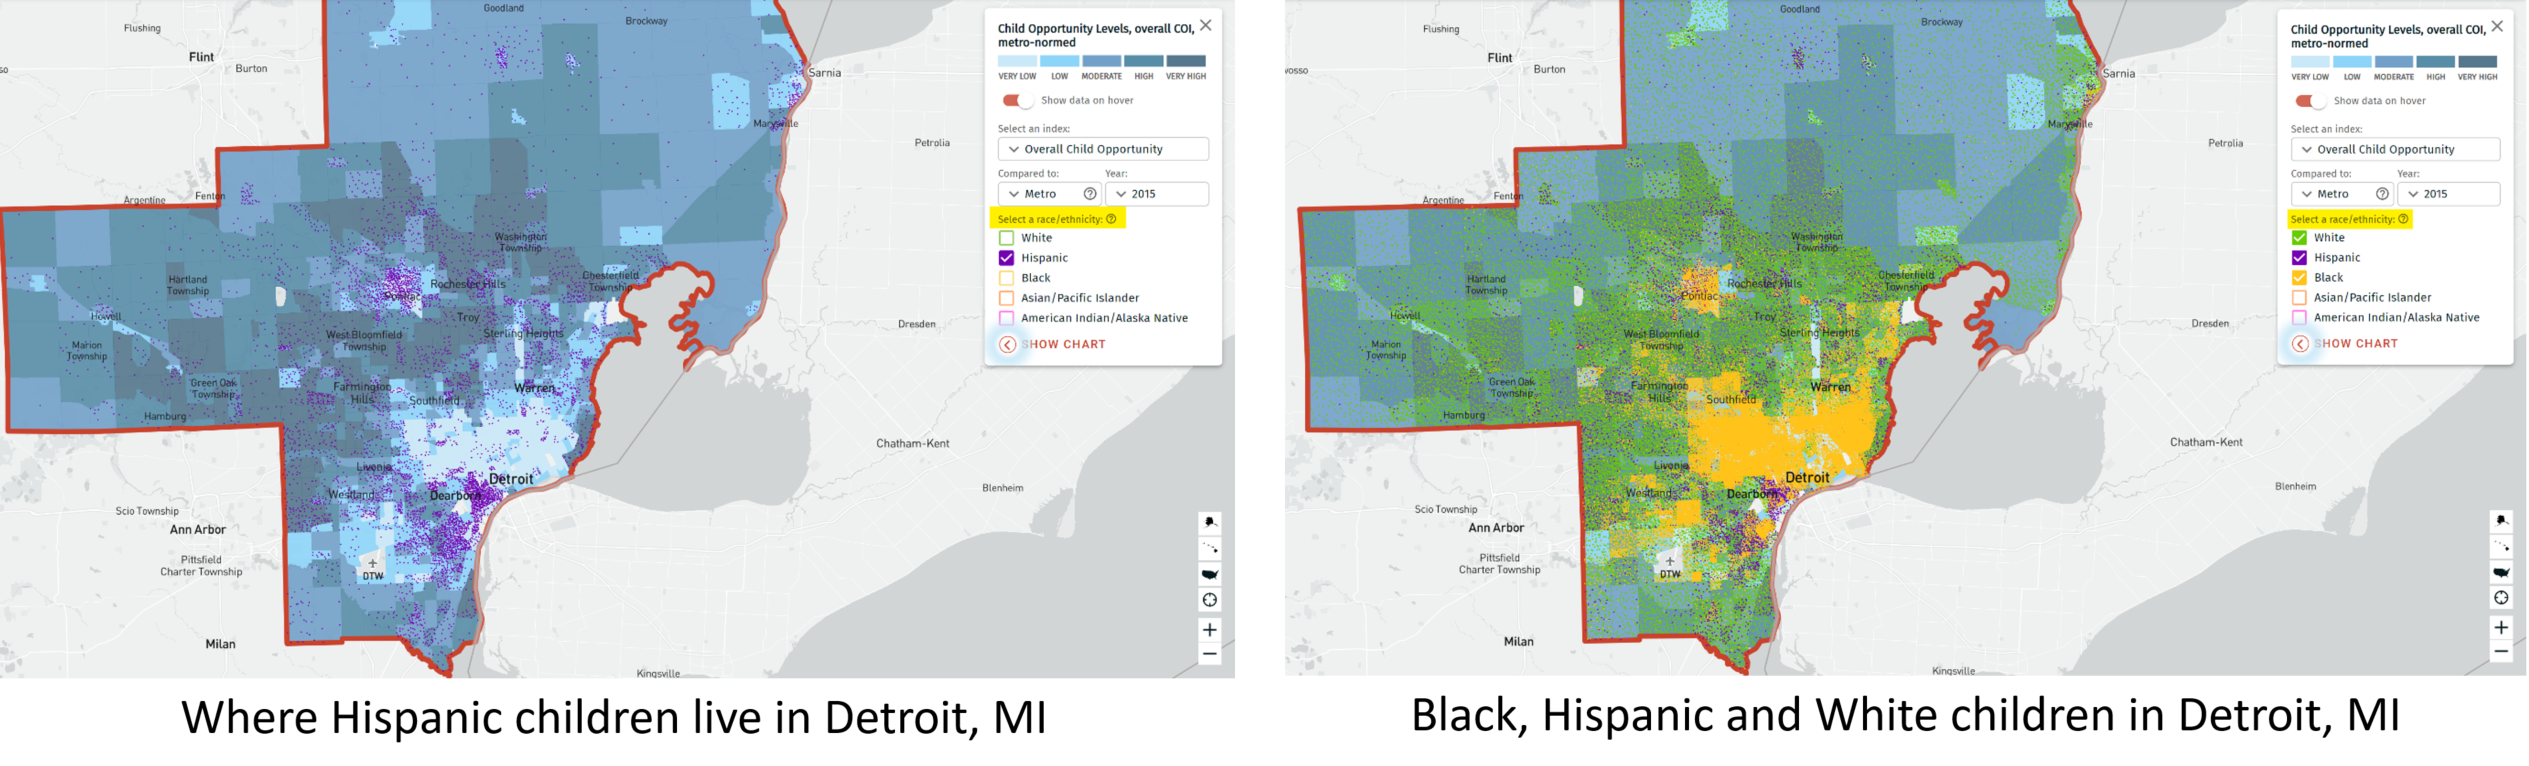 Image shows distribution of Hispanic children and three race groups in Detroit, MI 